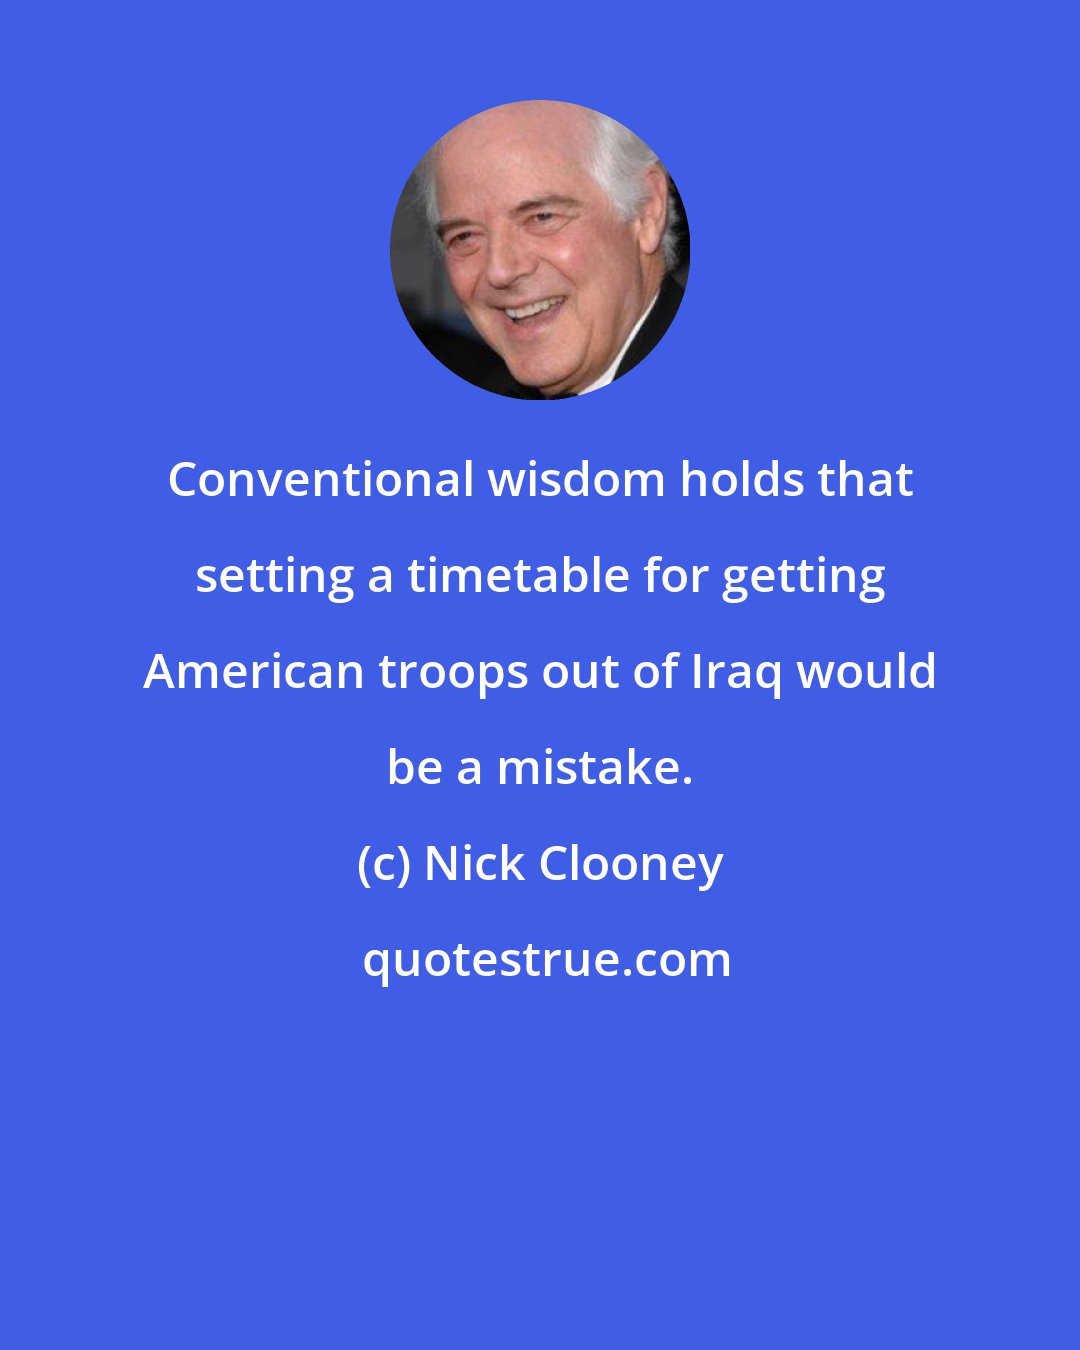 Nick Clooney: Conventional wisdom holds that setting a timetable for getting American troops out of Iraq would be a mistake.